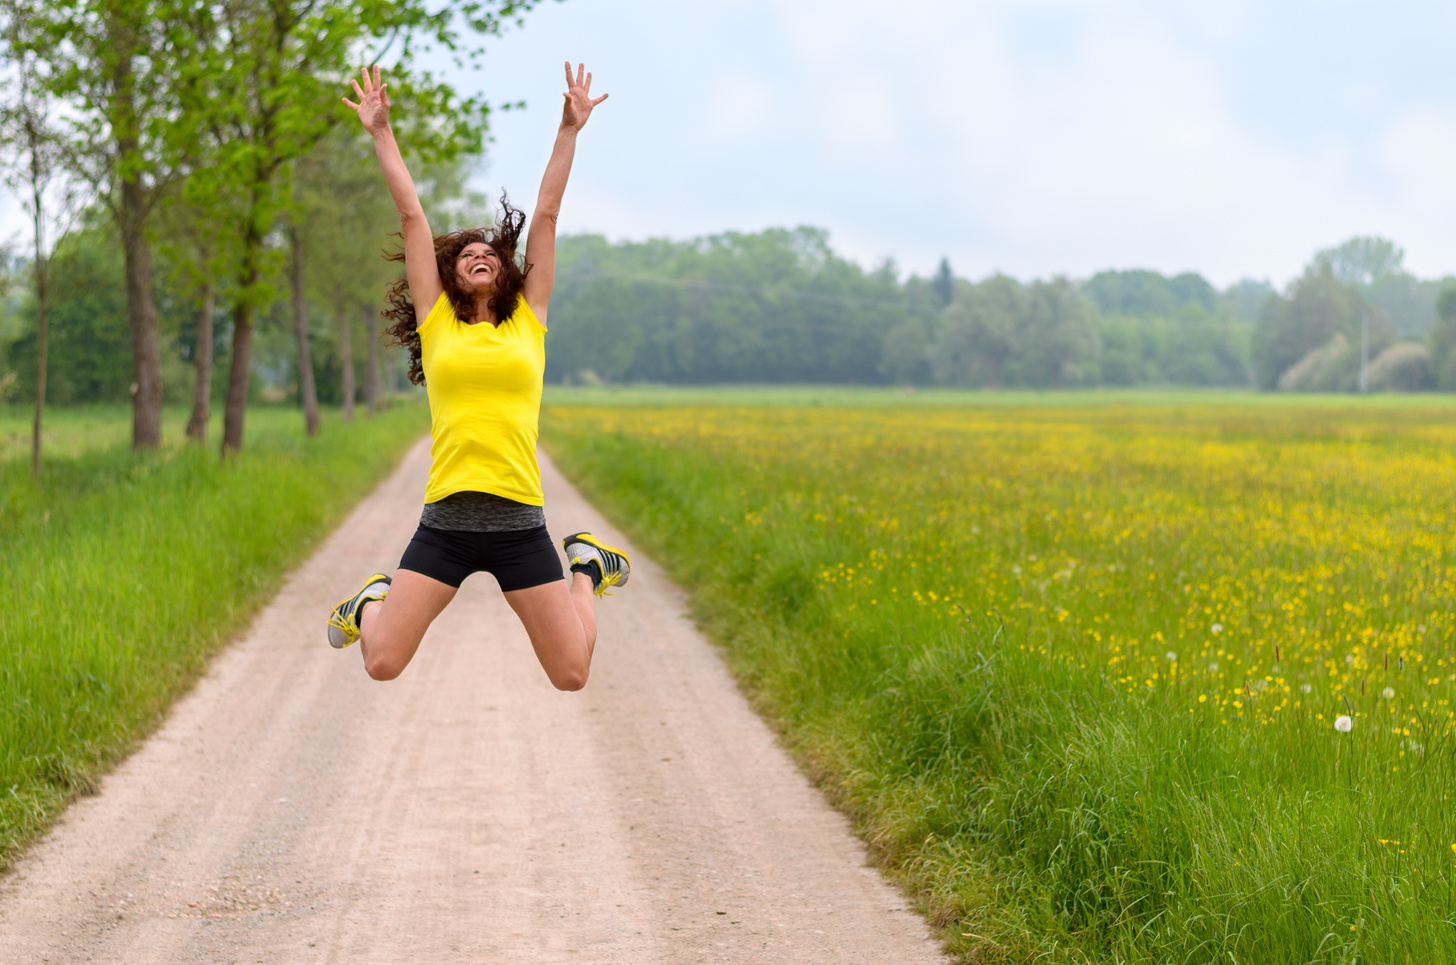 Energetic agile young woman leaping for joy